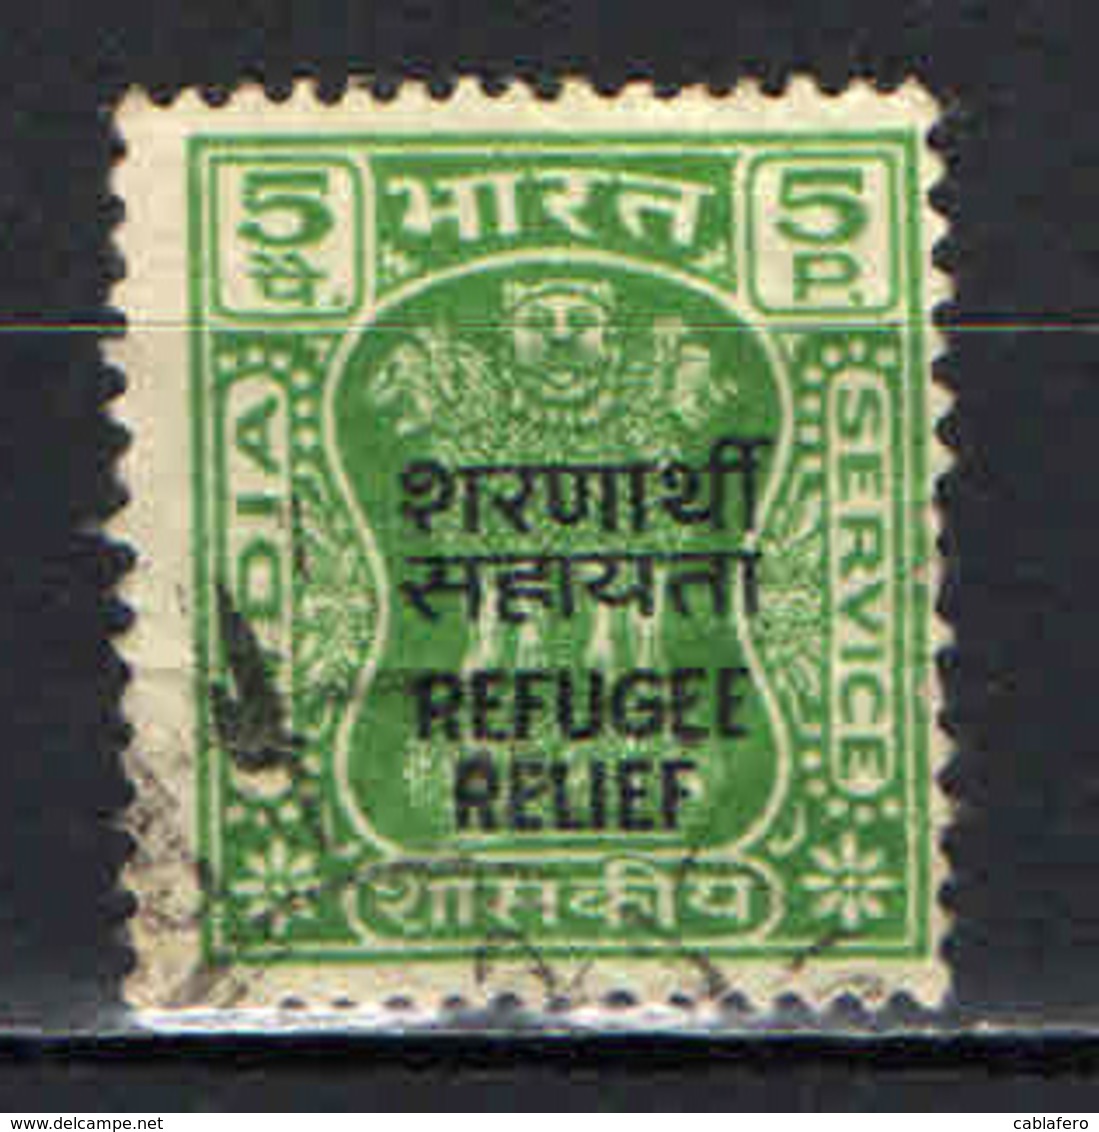 INDIA - 1971 - Overprinted “Refugee Relief” - USATO - Official Stamps